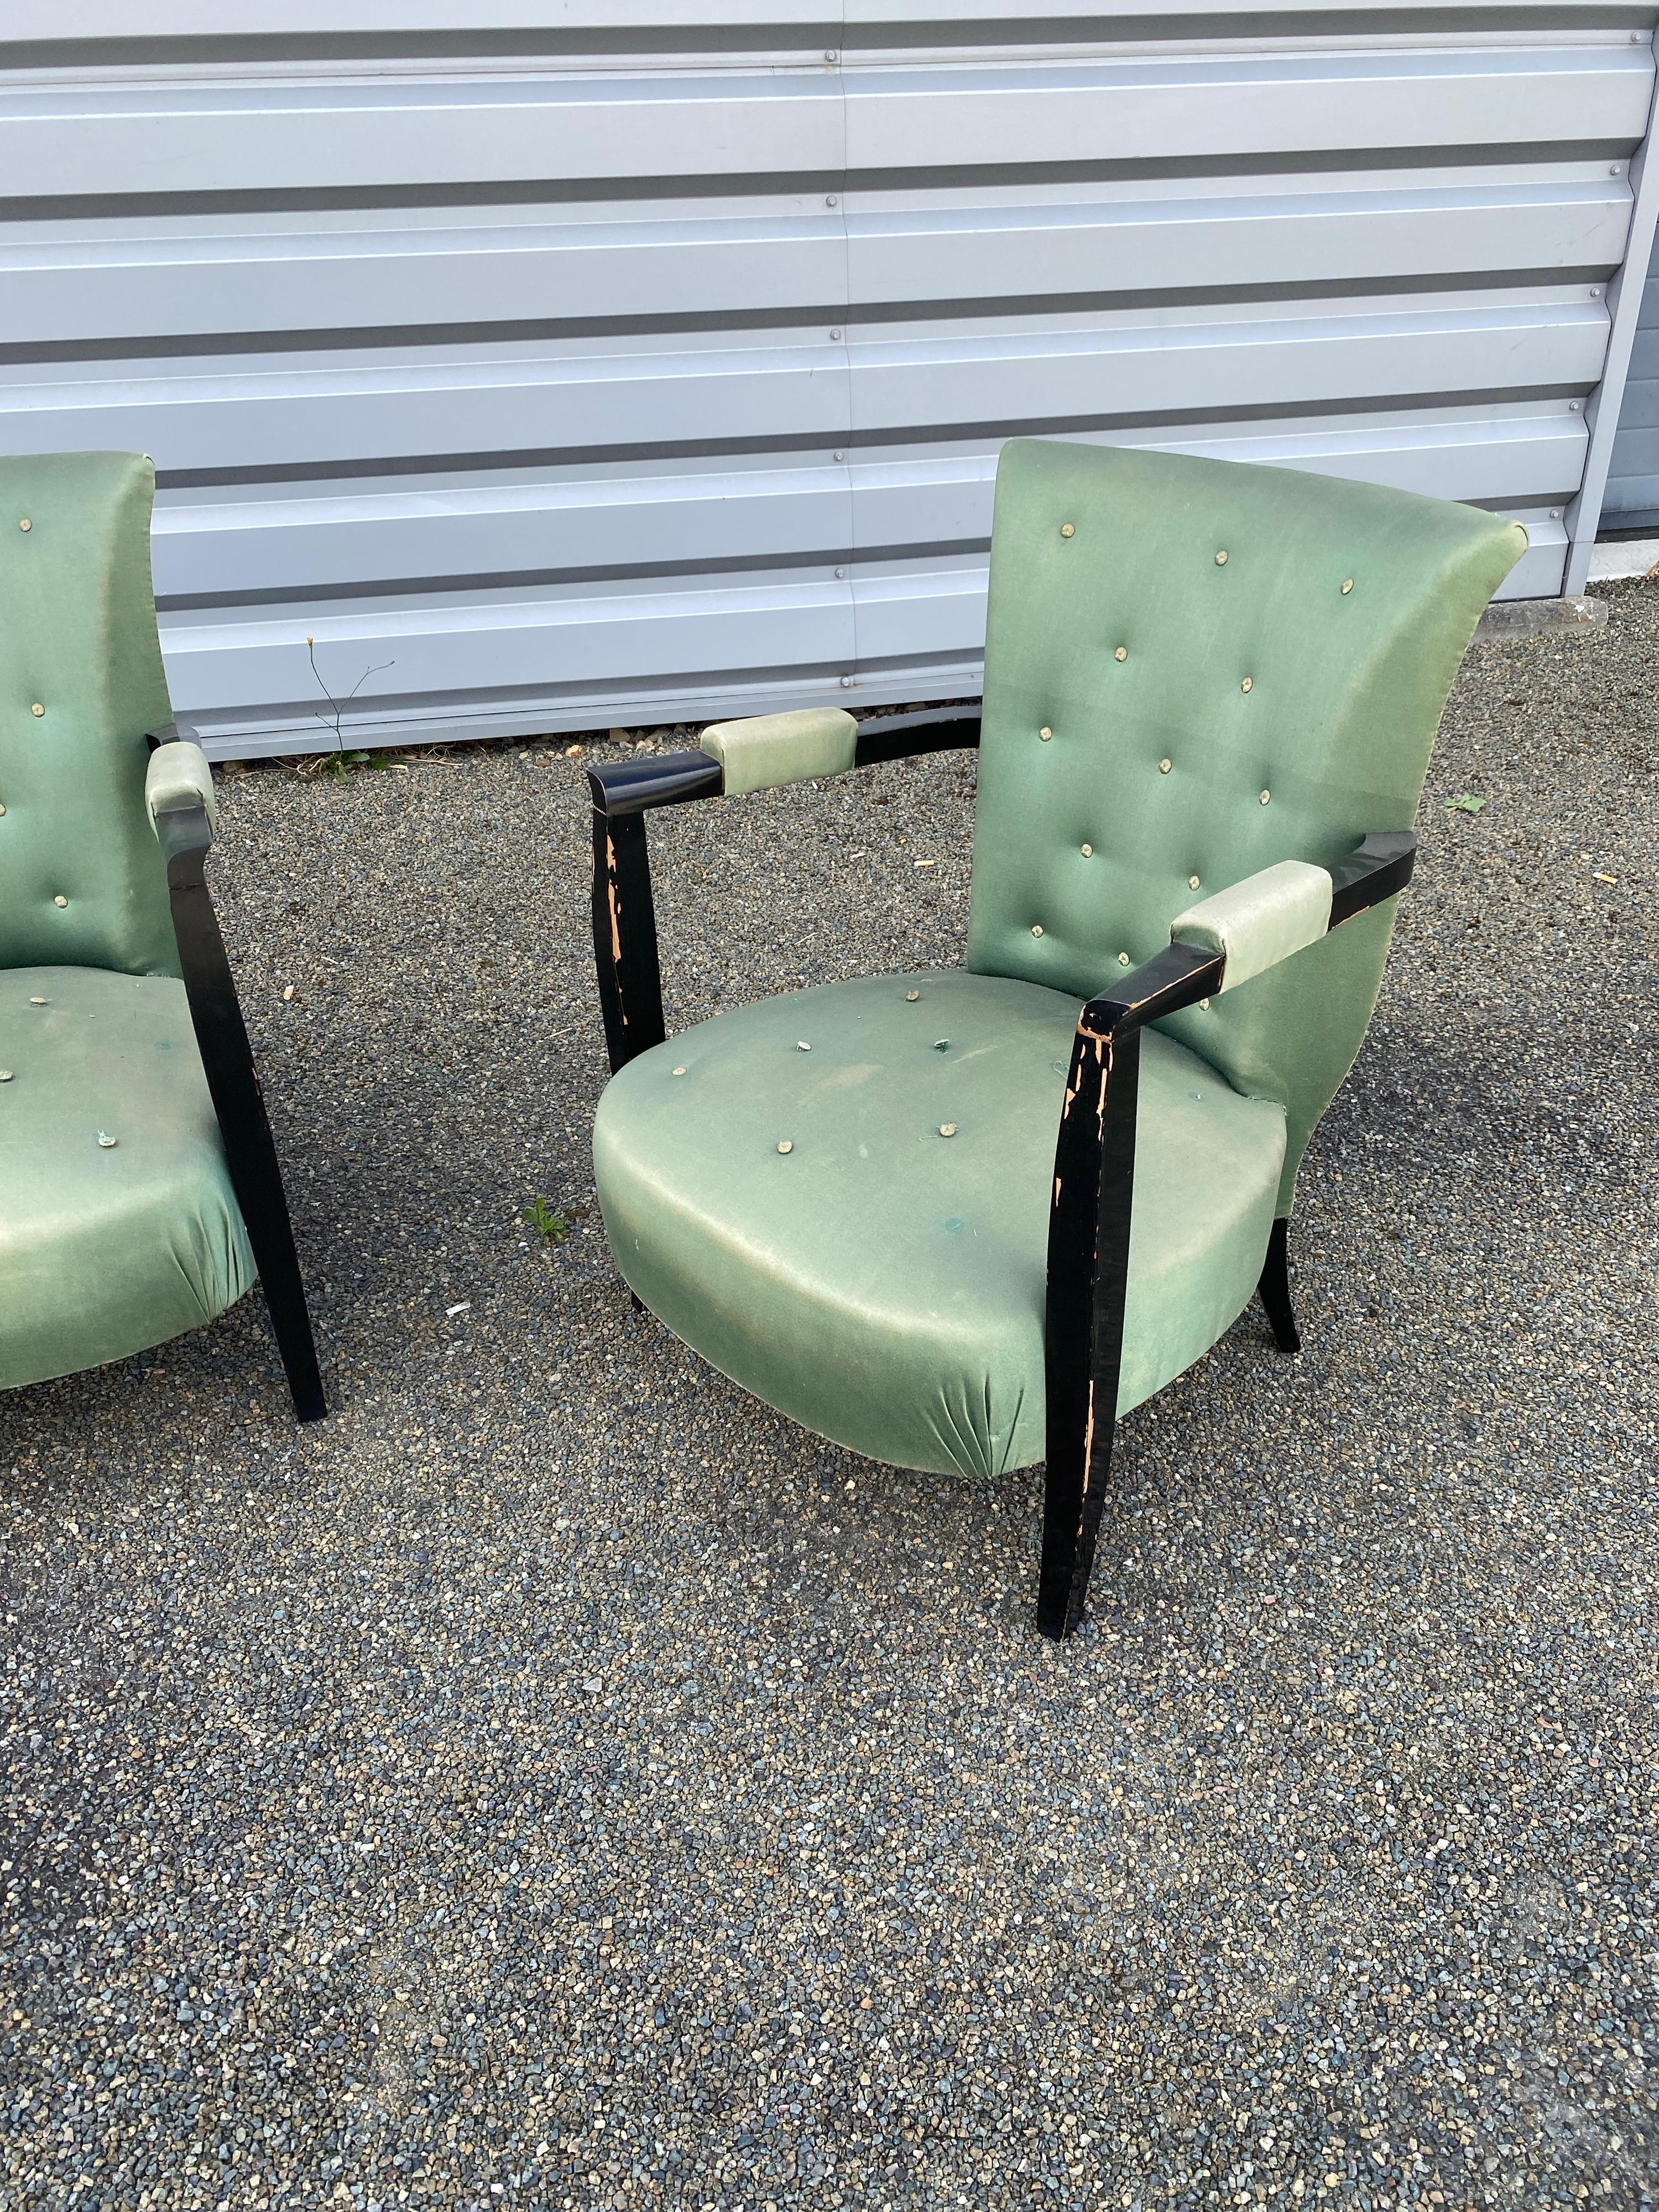 3 Art Deco armchairs in blackened wood, circa 1940.
Patina and coating to be redone.